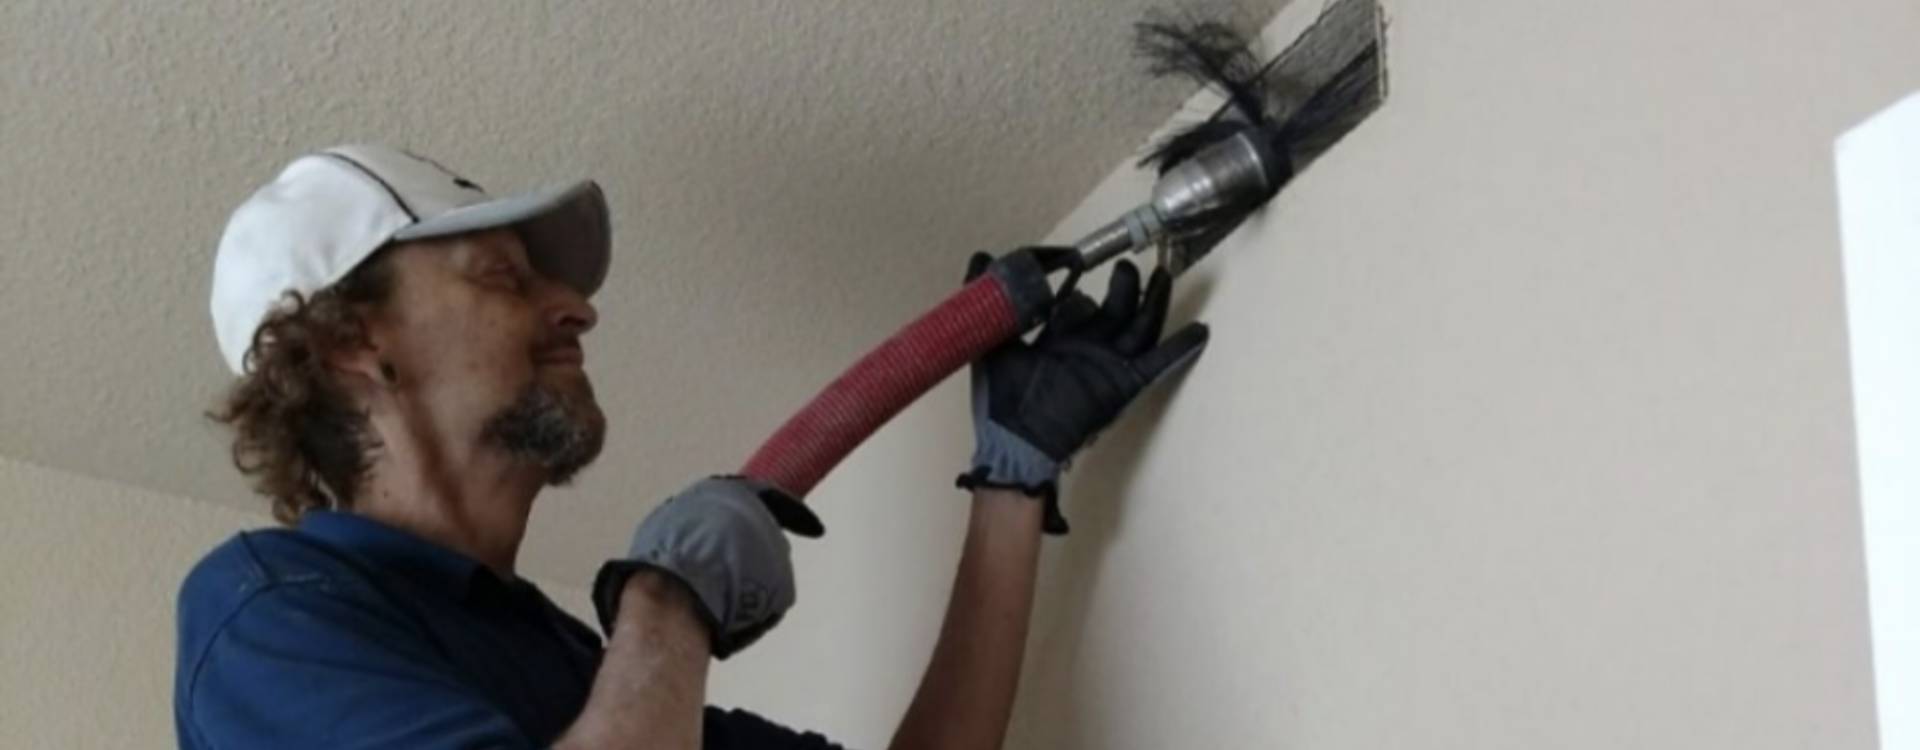 DRYER VENT CLEANING IN COLORADO SPRINGS